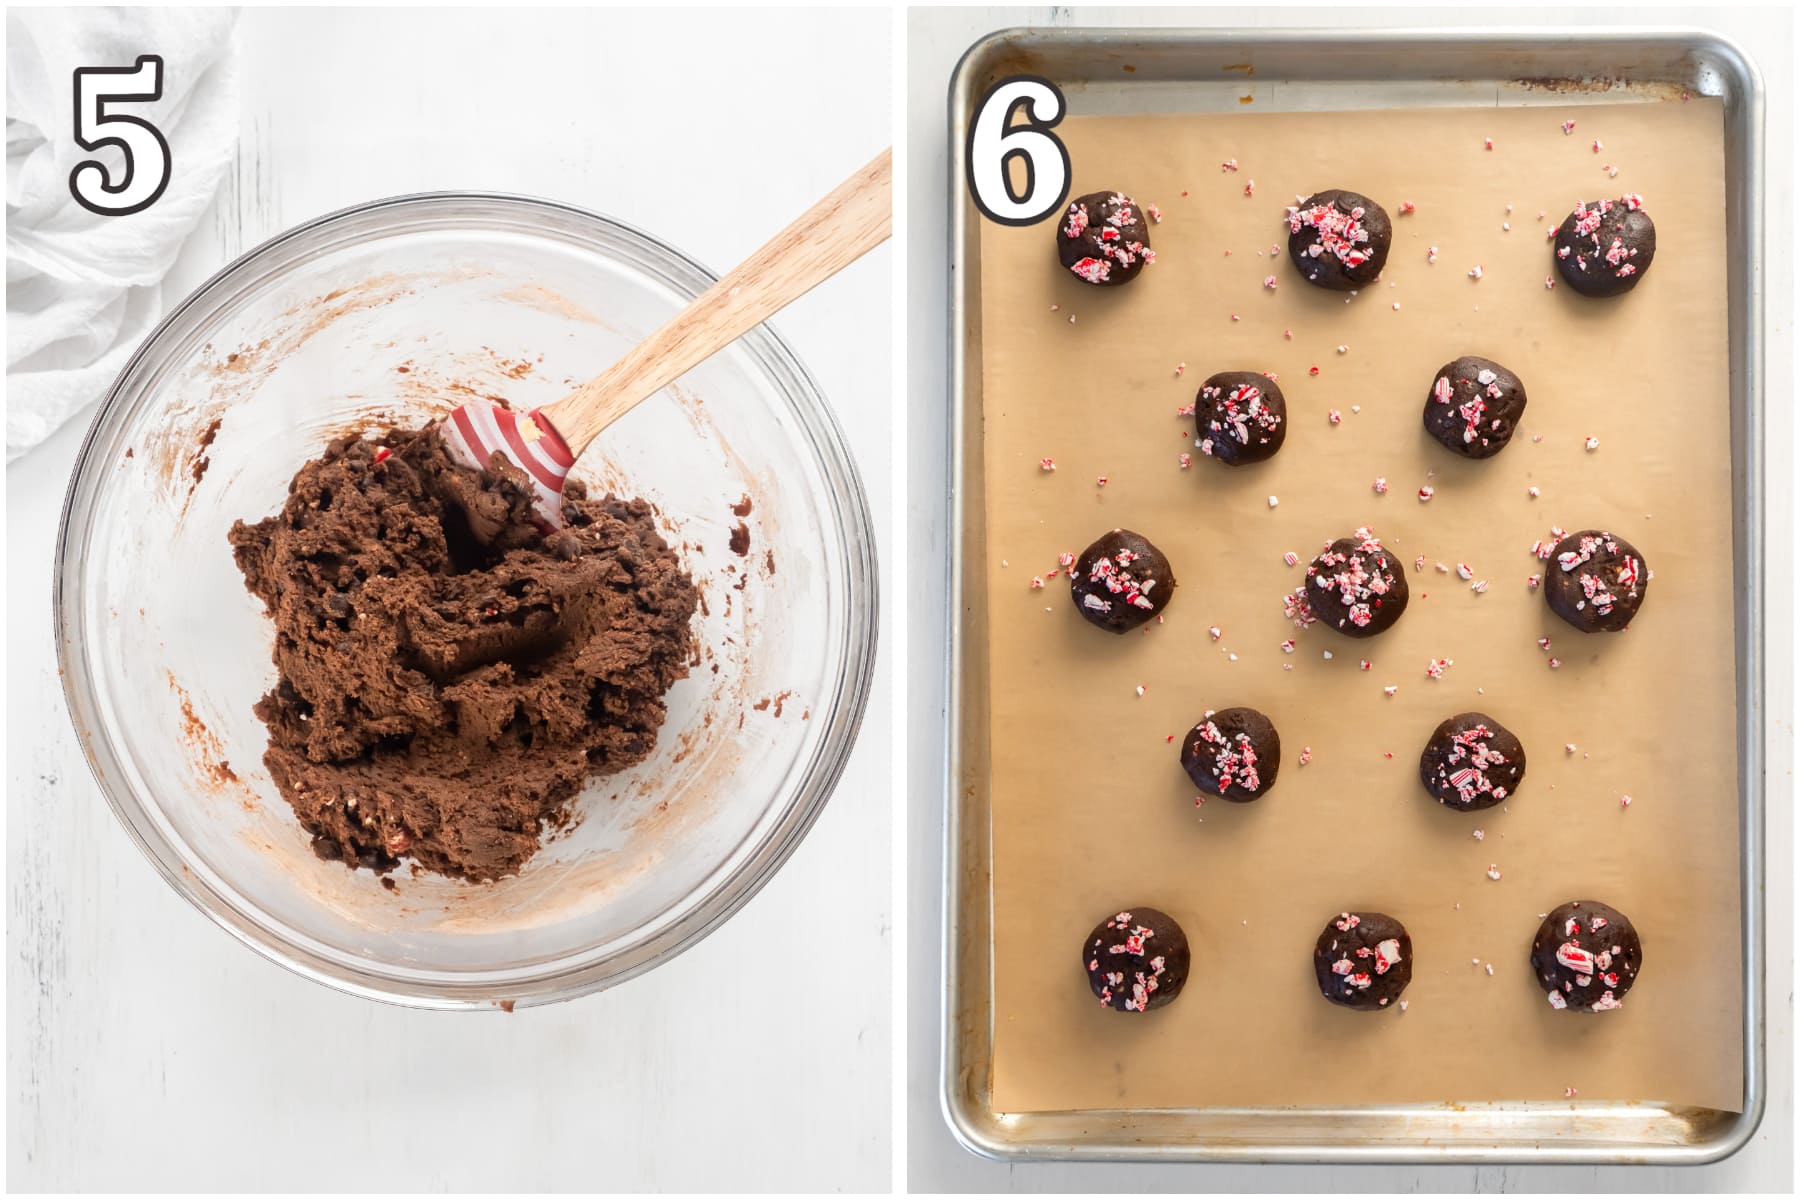 photo collage demonstrating how to make chocolate peppermint cookie dough and shape into balls.